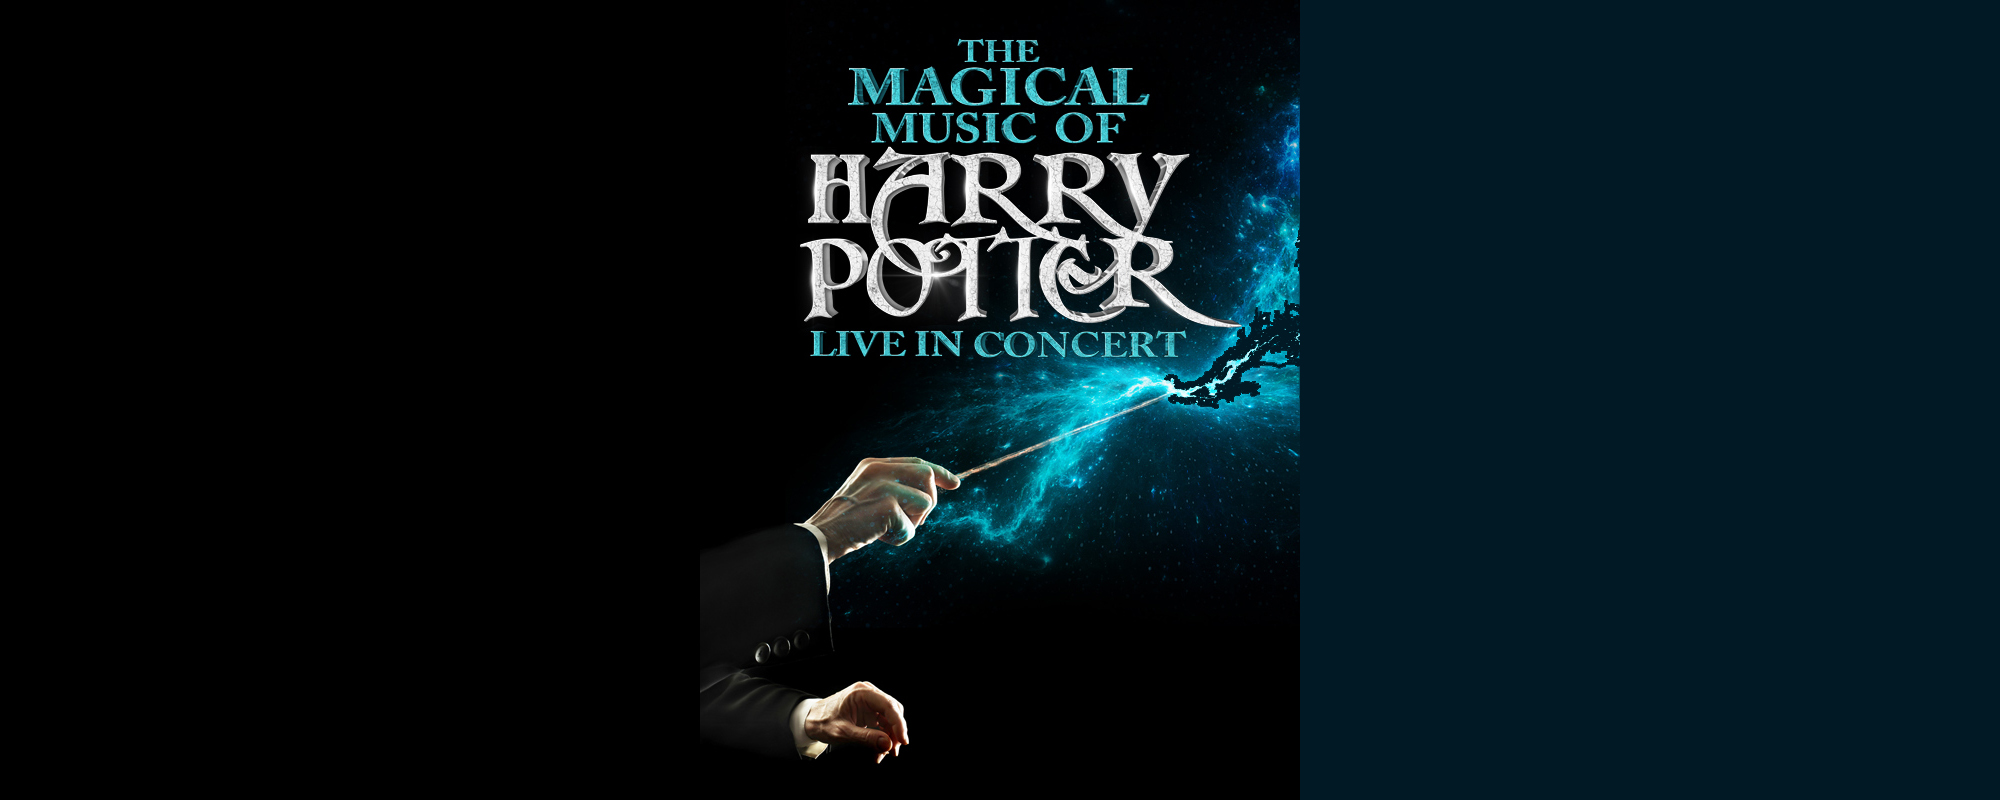 The Magical Music of Harry Potter